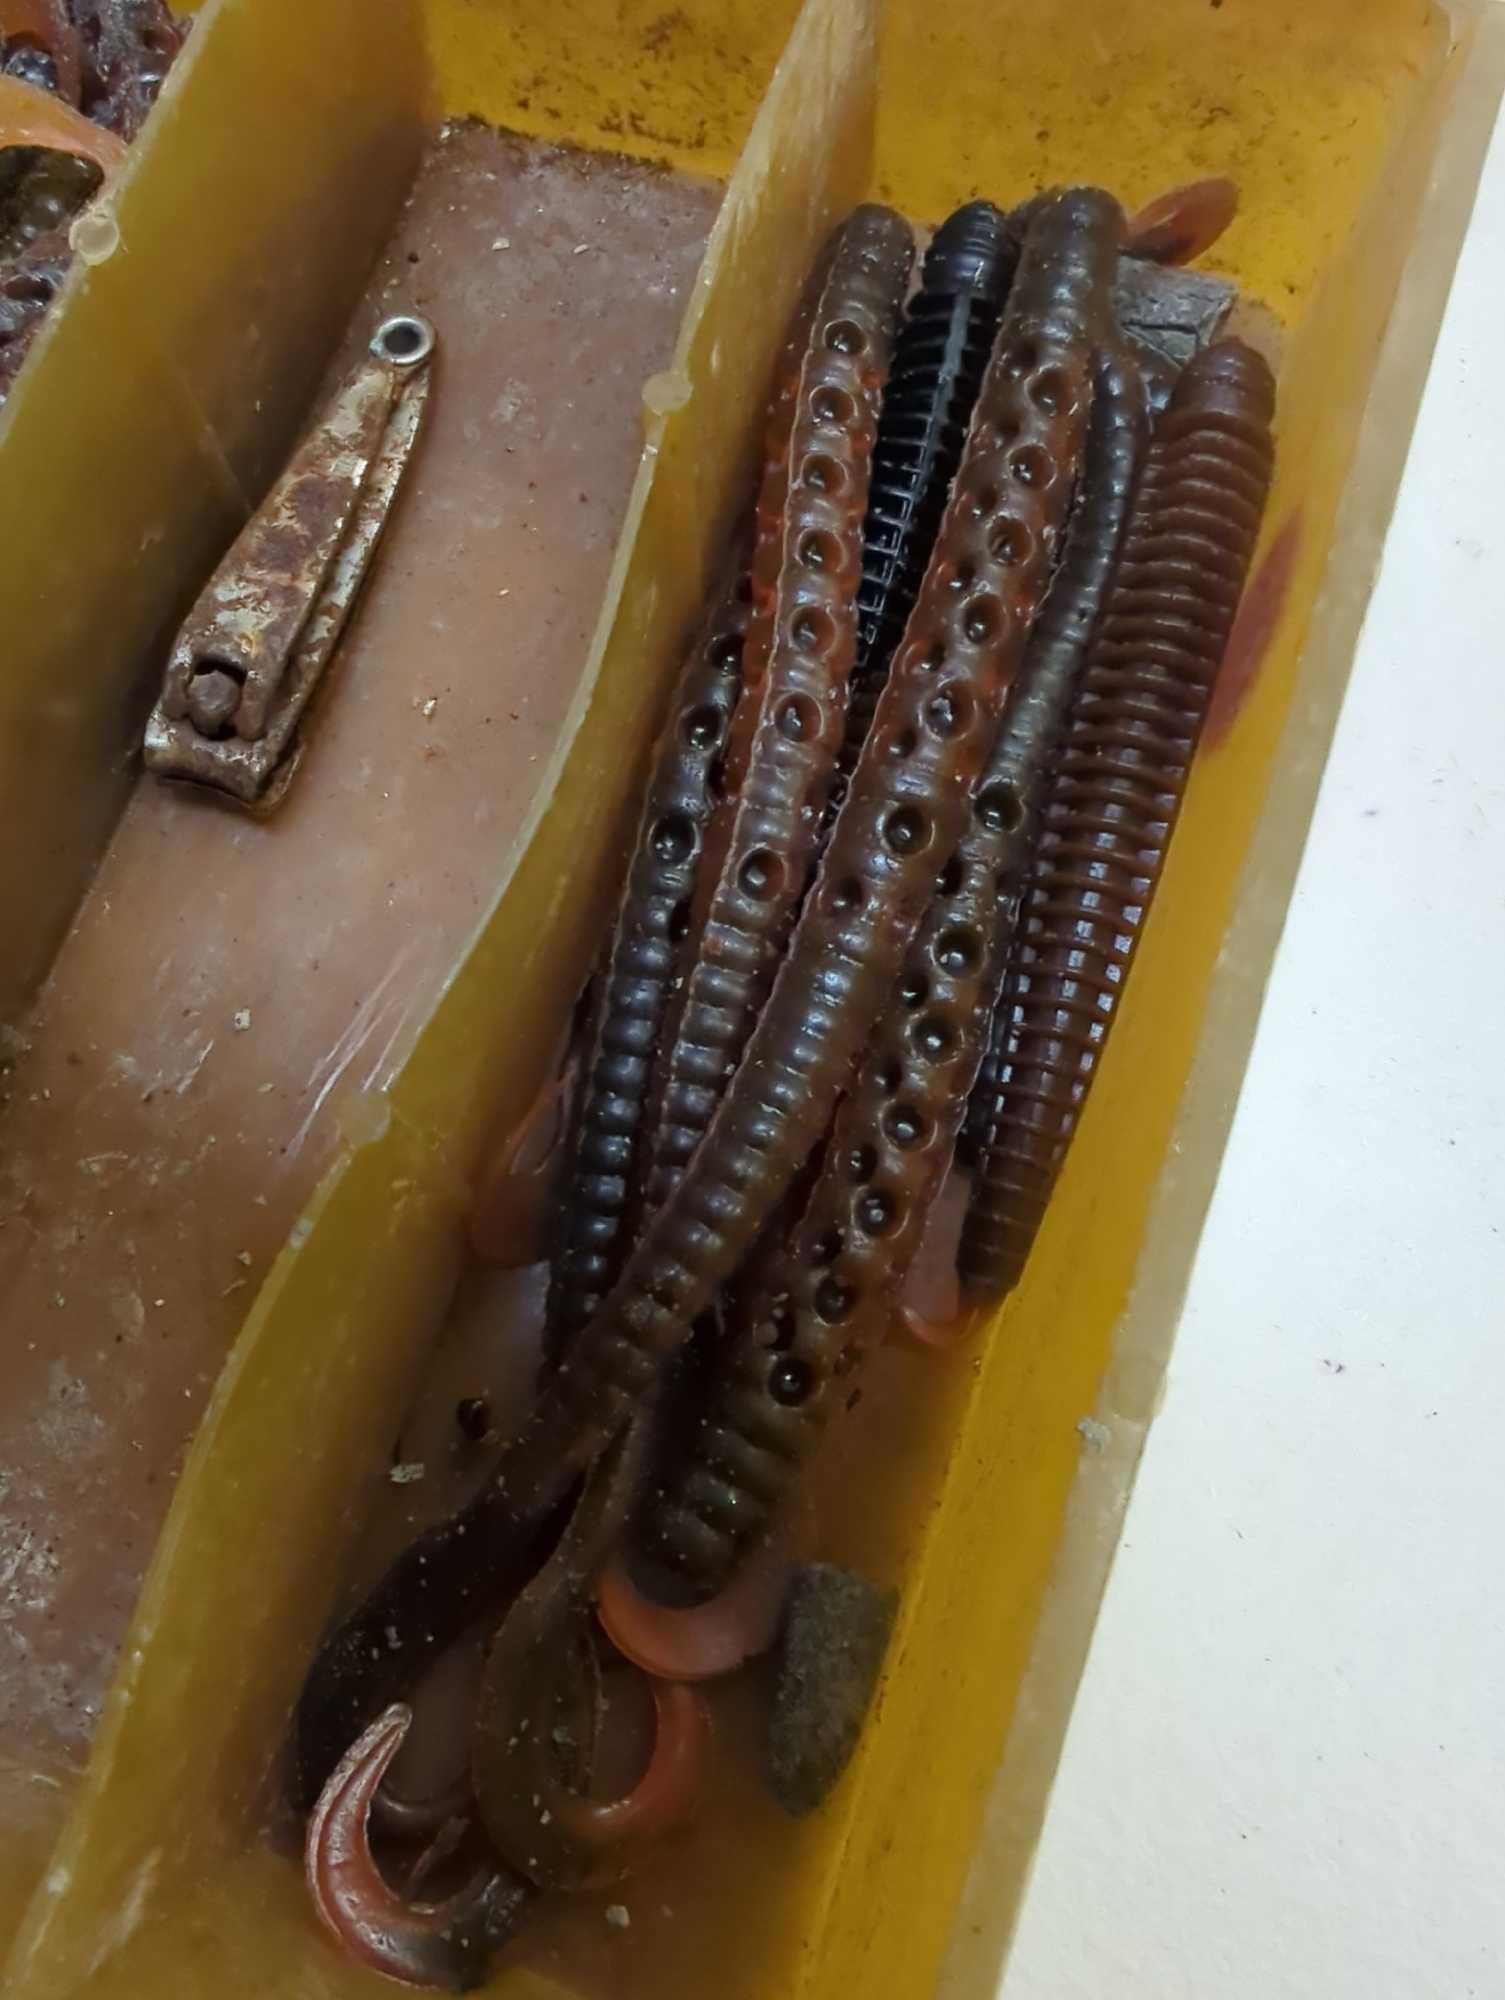 Brown Tackle Box and contents including worm fishing lures. Comes as is shown in photos. Appears to